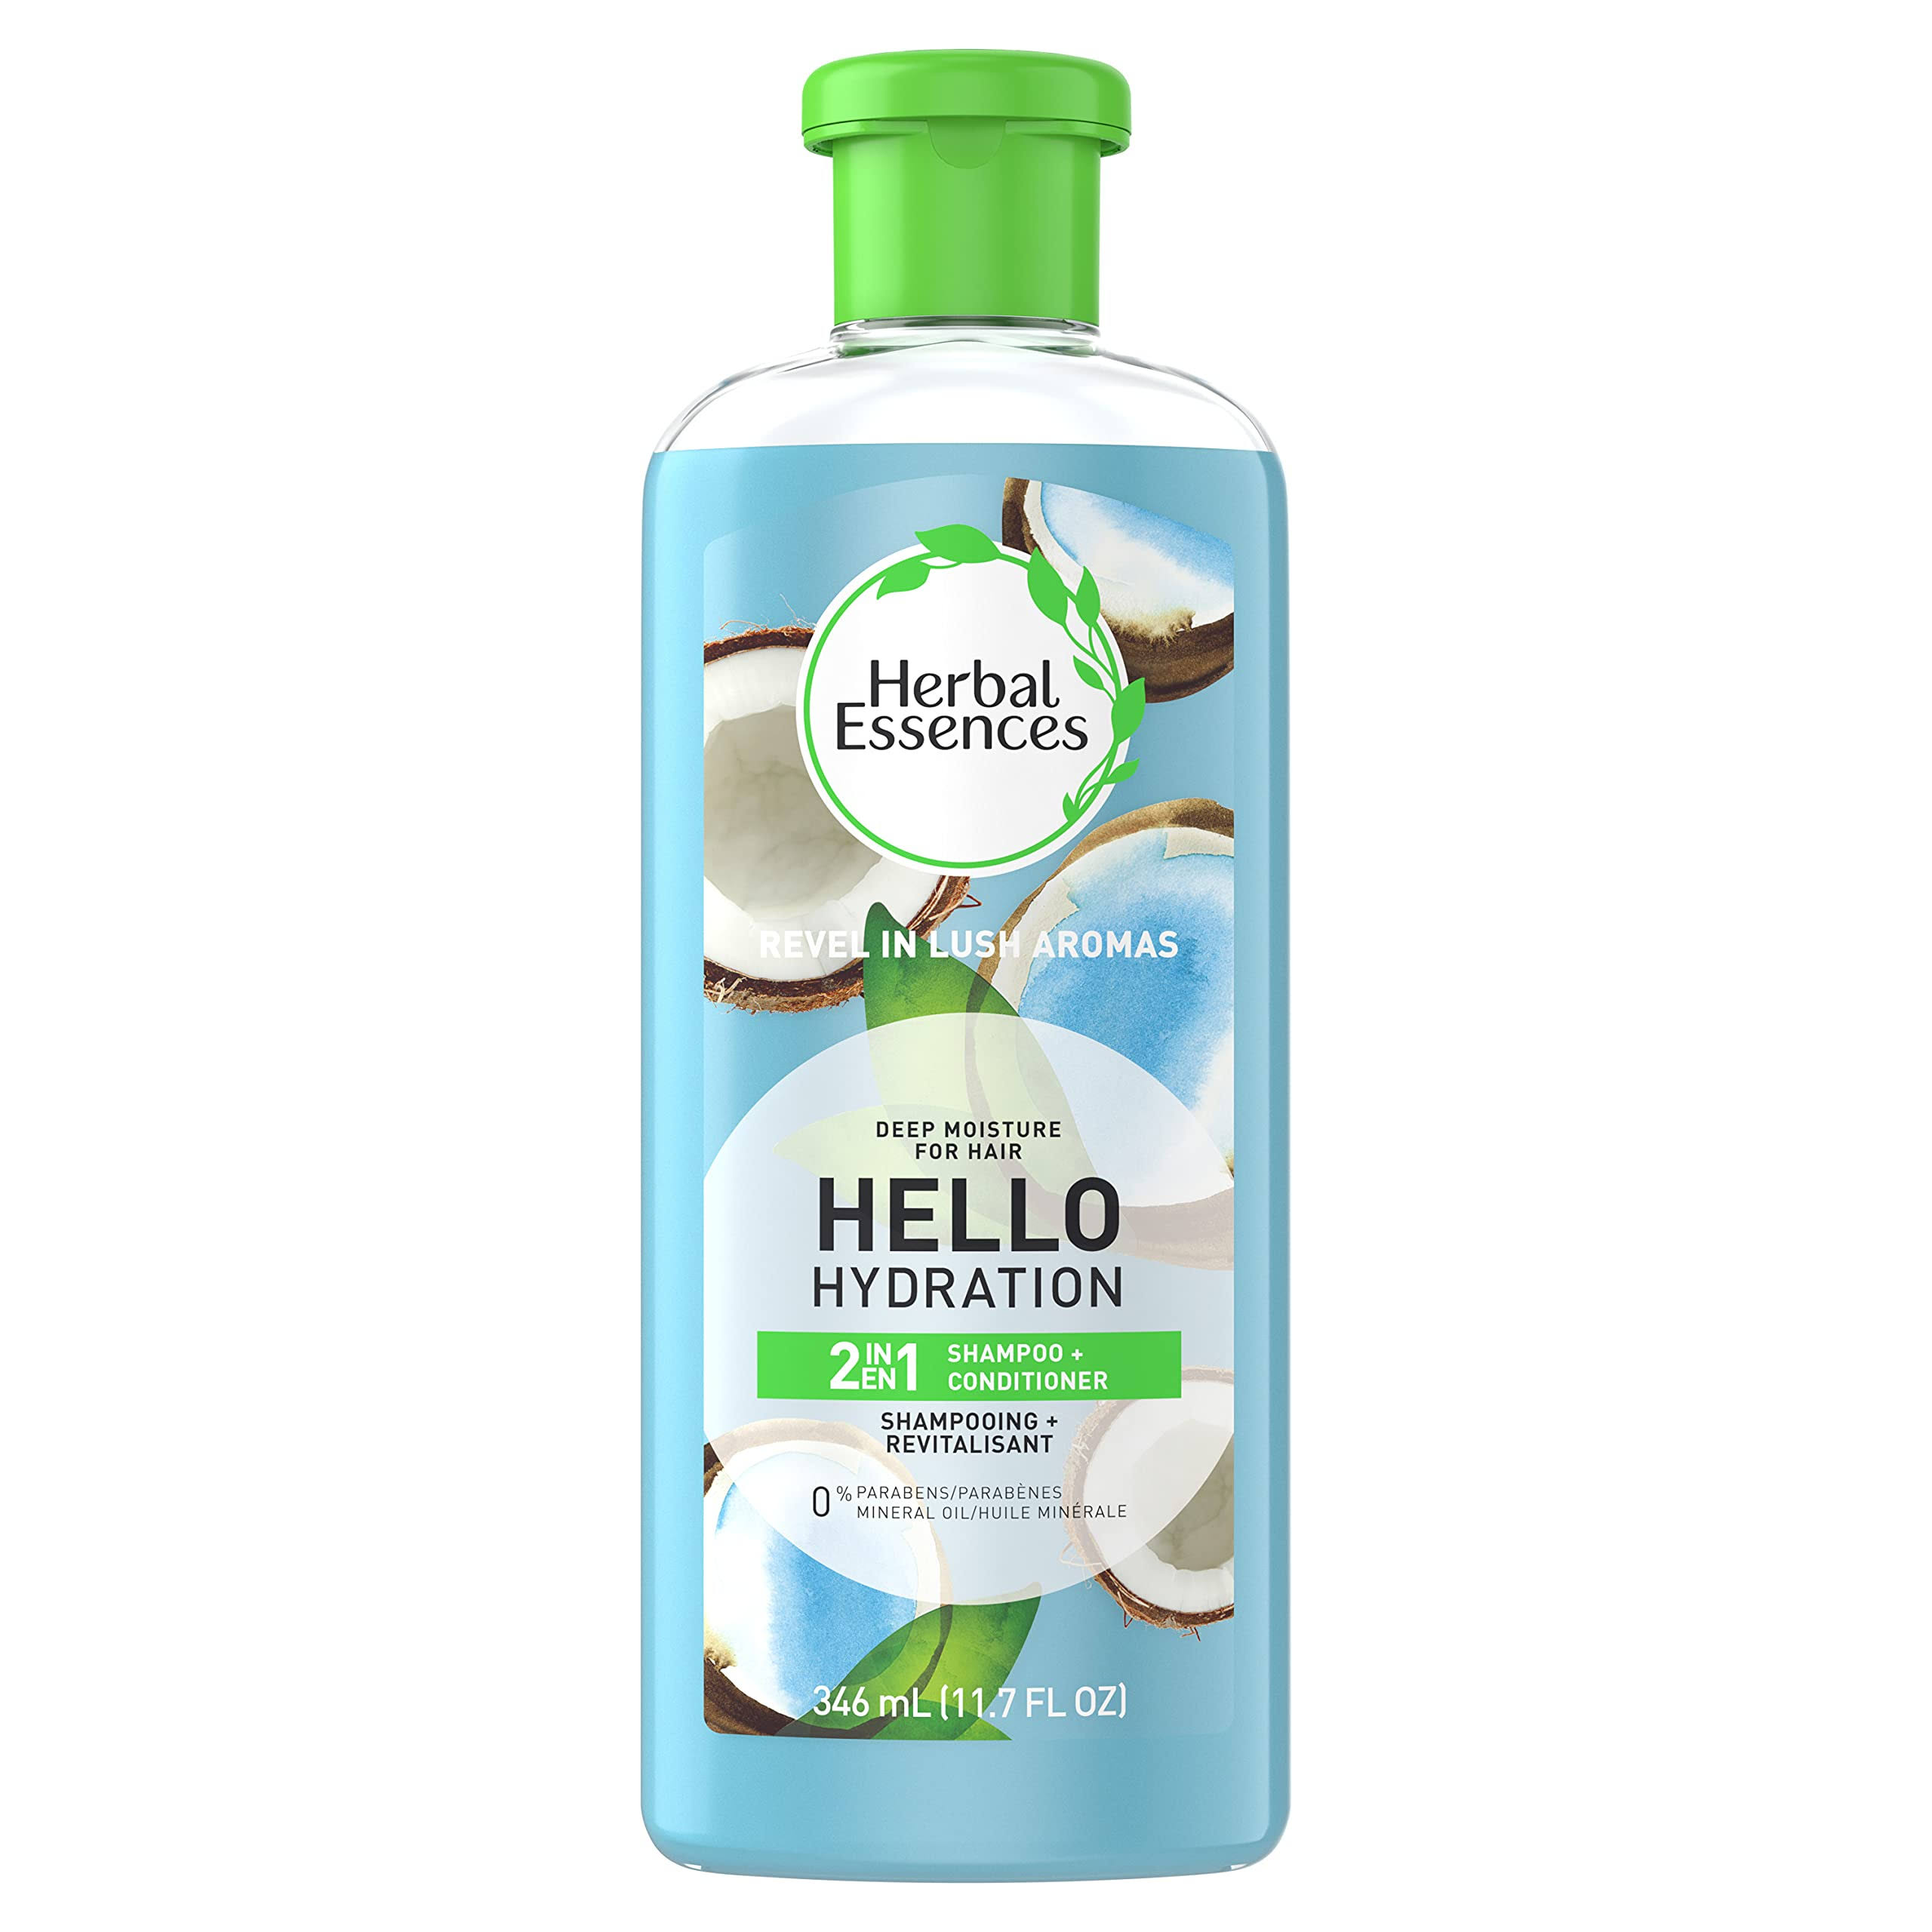 Herbal Essences Hello Hydration 2In1 Shampoo Conditioner, Moisture For Hair